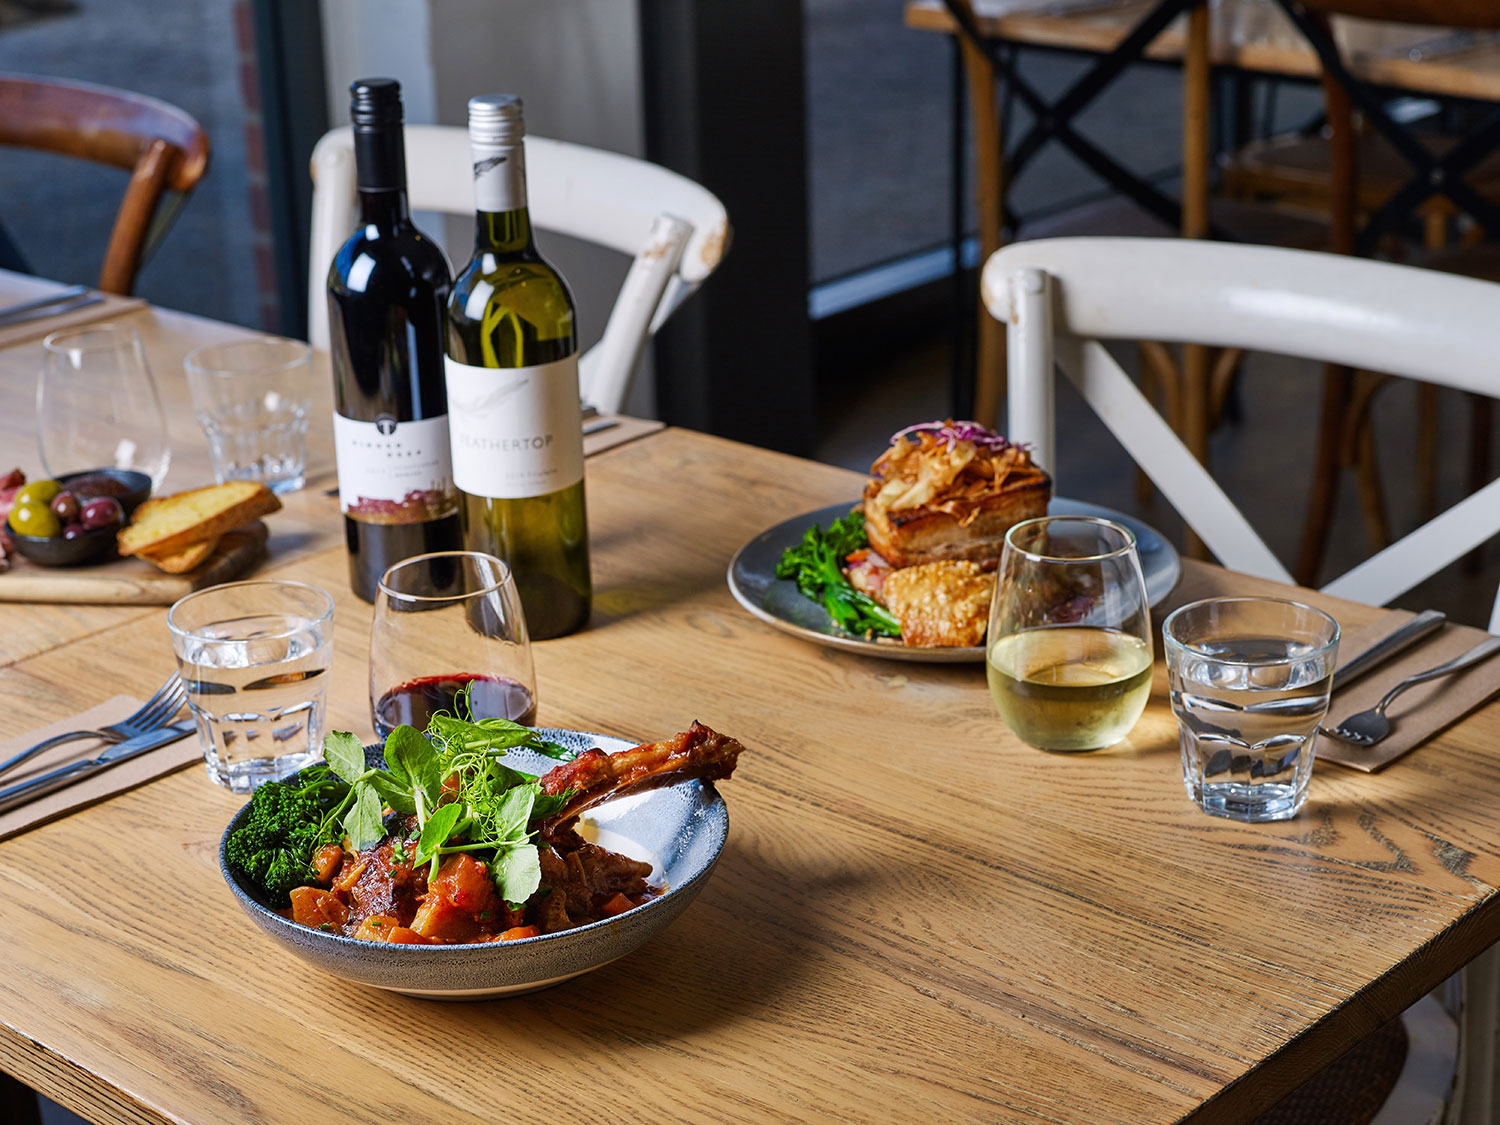 The Punka Pub offers a family-friendly menu ranging from delicate bites to pub classics and more hearty gastro-pub meals